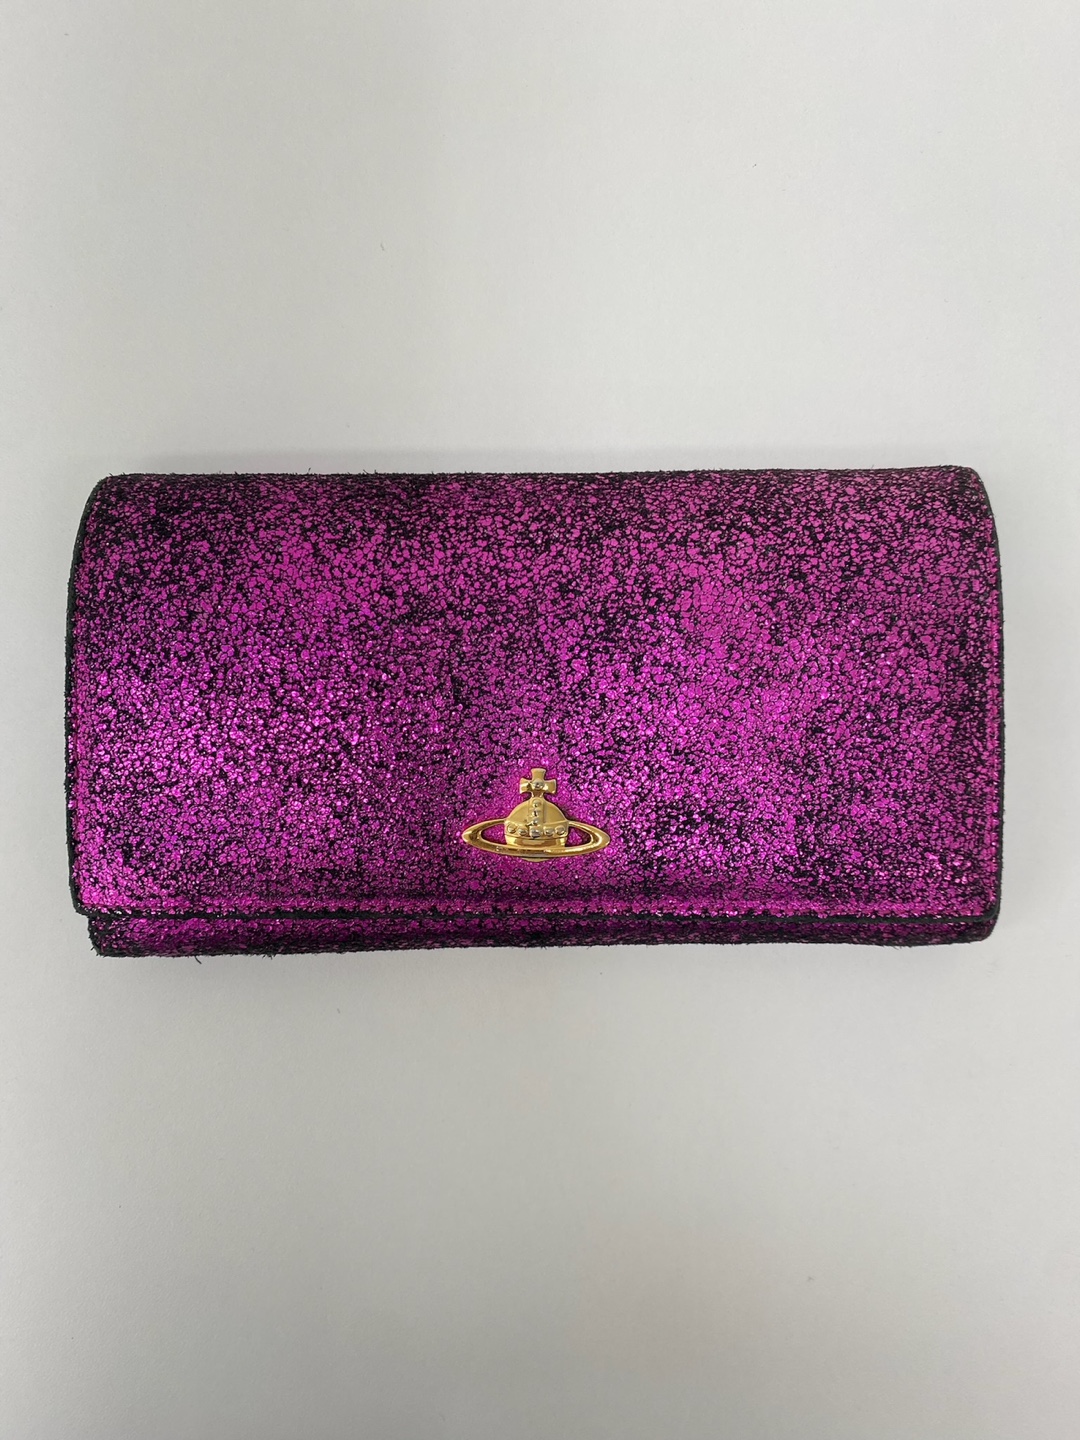 Vivienne Westwood Pink Glitter Long Wallet(made in italy)